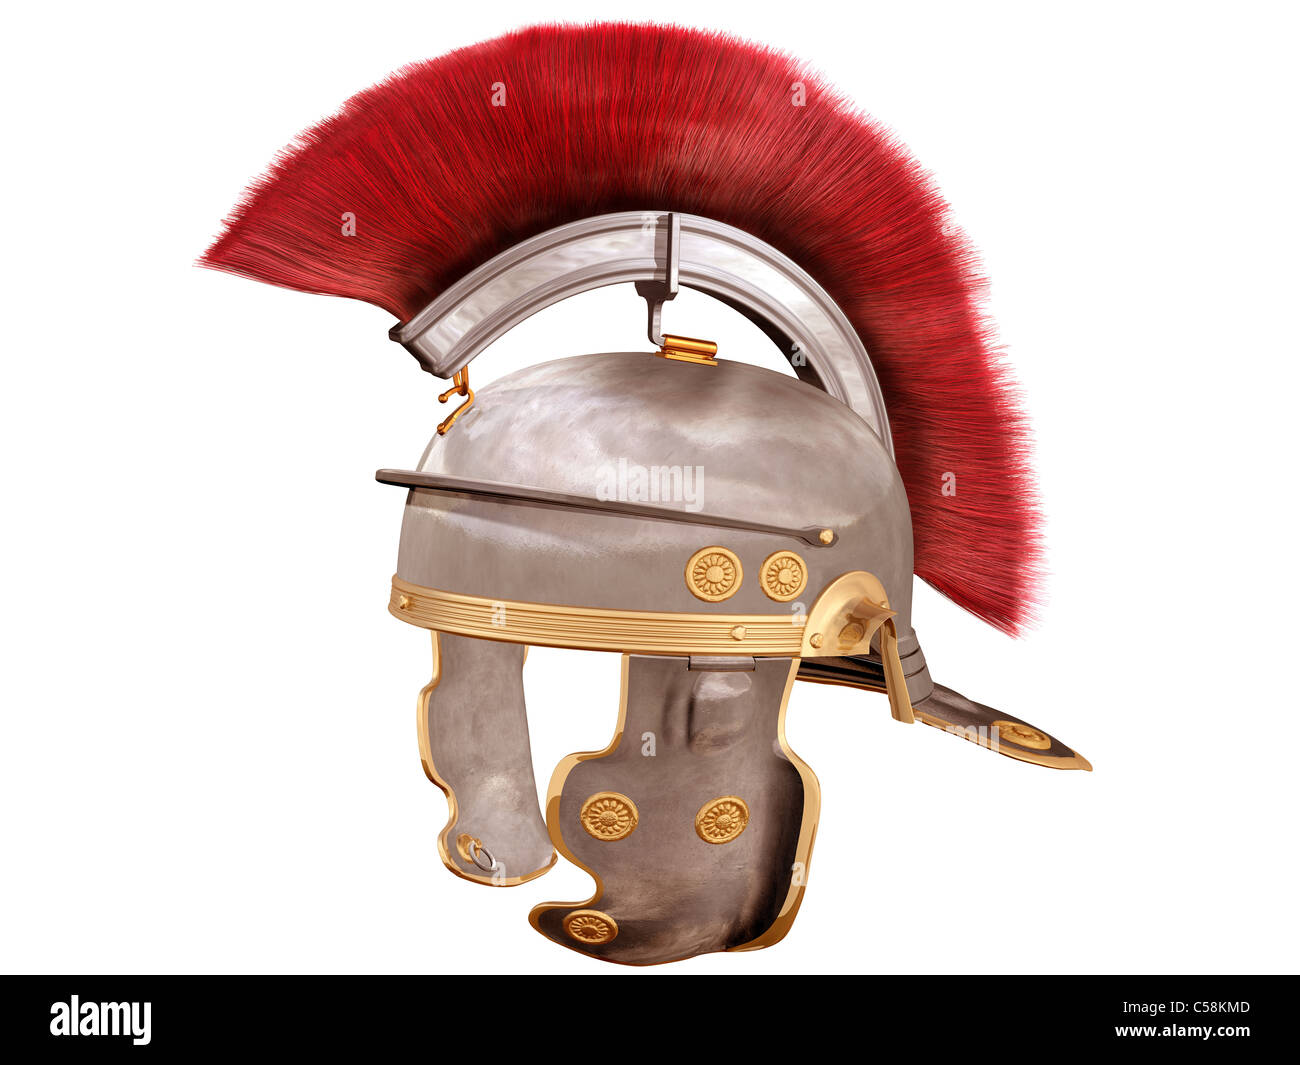 Isolated illustration of a Roman Helmet with a scarlet plume Stock Photo